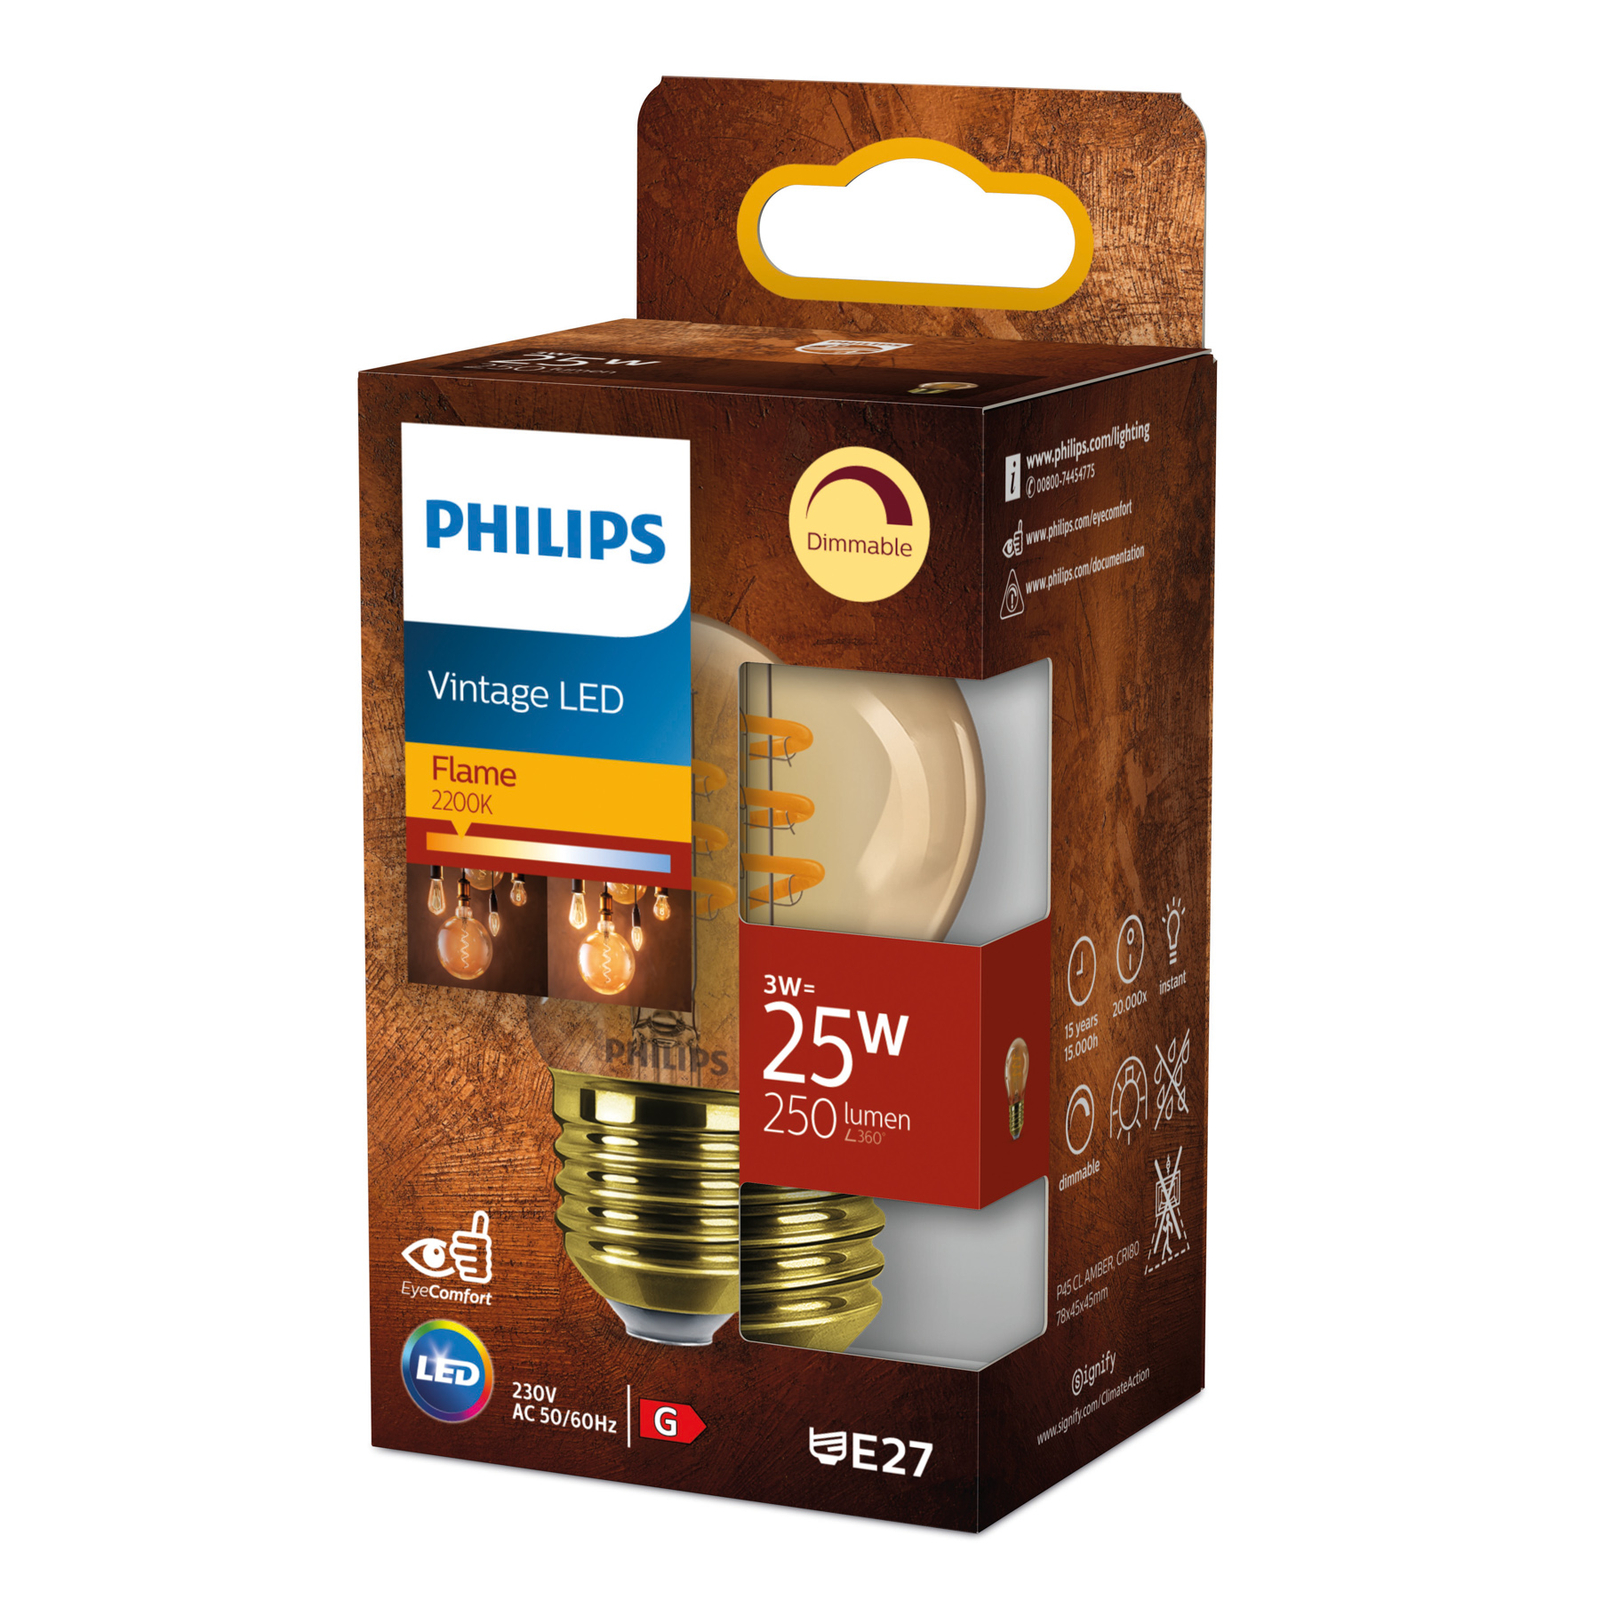 Philips E27 LED bulb G45 3W dimmable 2,200K gold